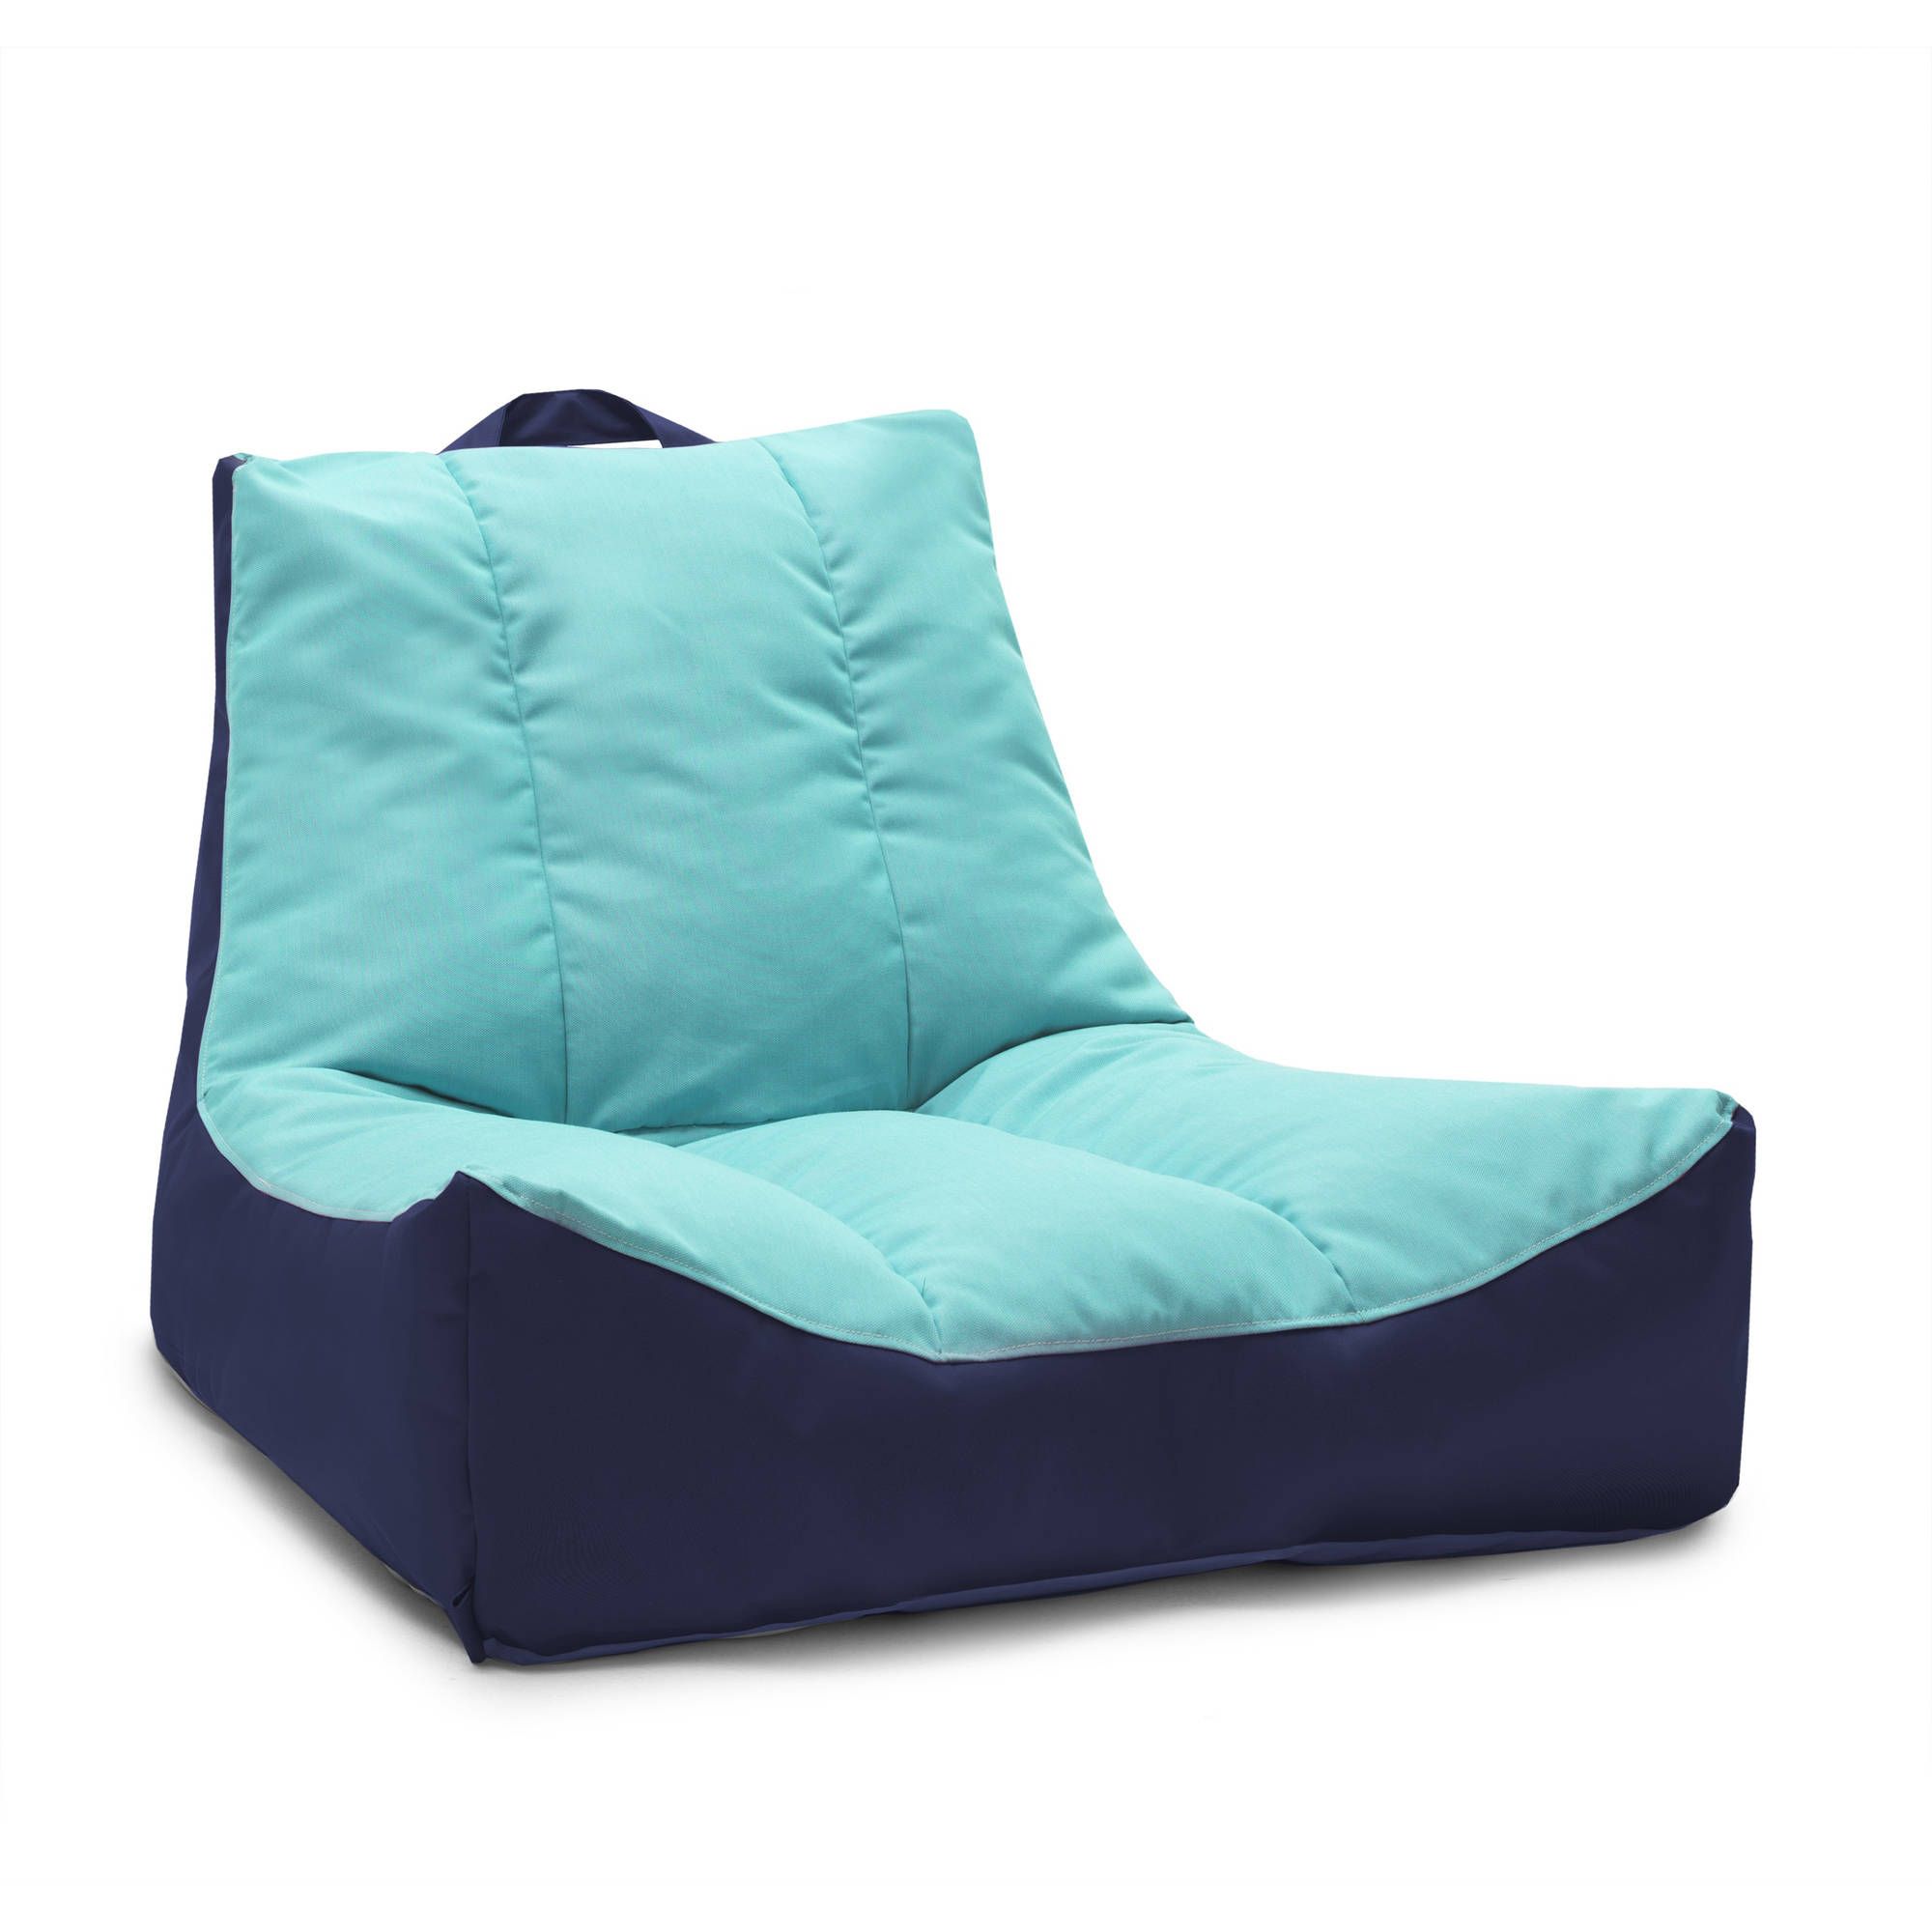 Big Joe Milano Bean Bag Chair, Multiple Colors – 32" X 28" X 25" Intended For Big Joe Mobilite Velvet Rocking Chairs (View 19 of 20)